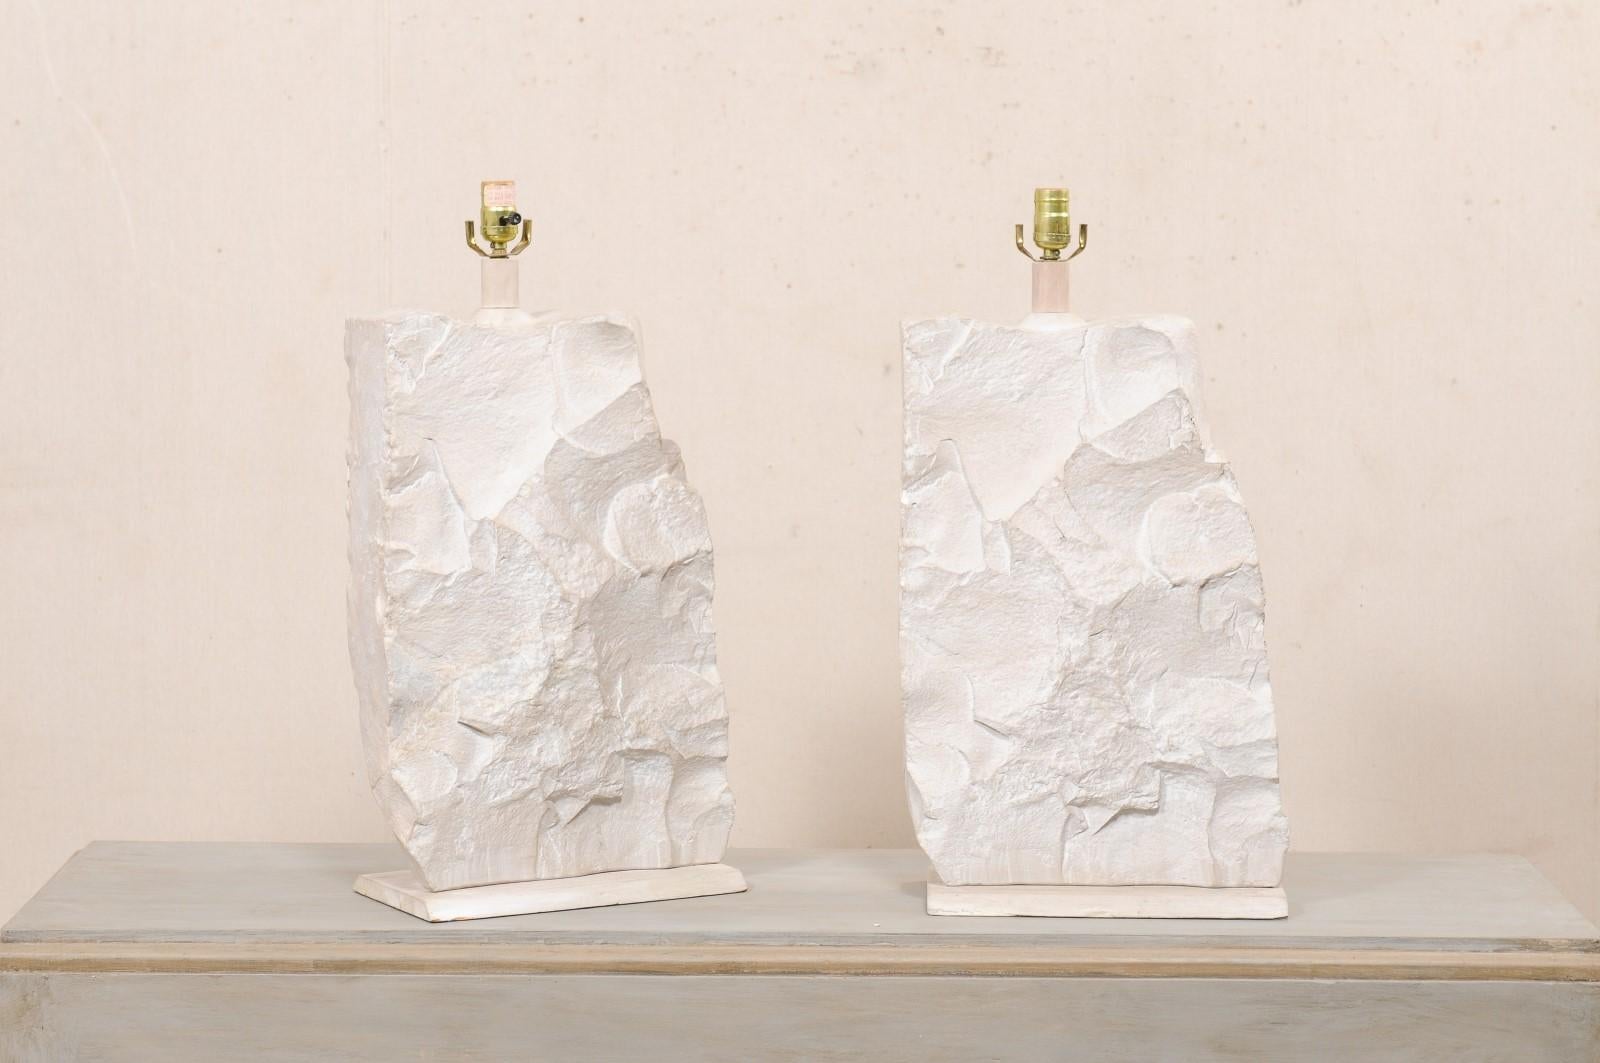 A pair of vintage American plaster table lamps attributed to Sirmos, though markings. This pair of plaster table lamps each feature a modern, quarry rock or brutalist design. The lamp bodies are made of plaster, have a neutral white and cream